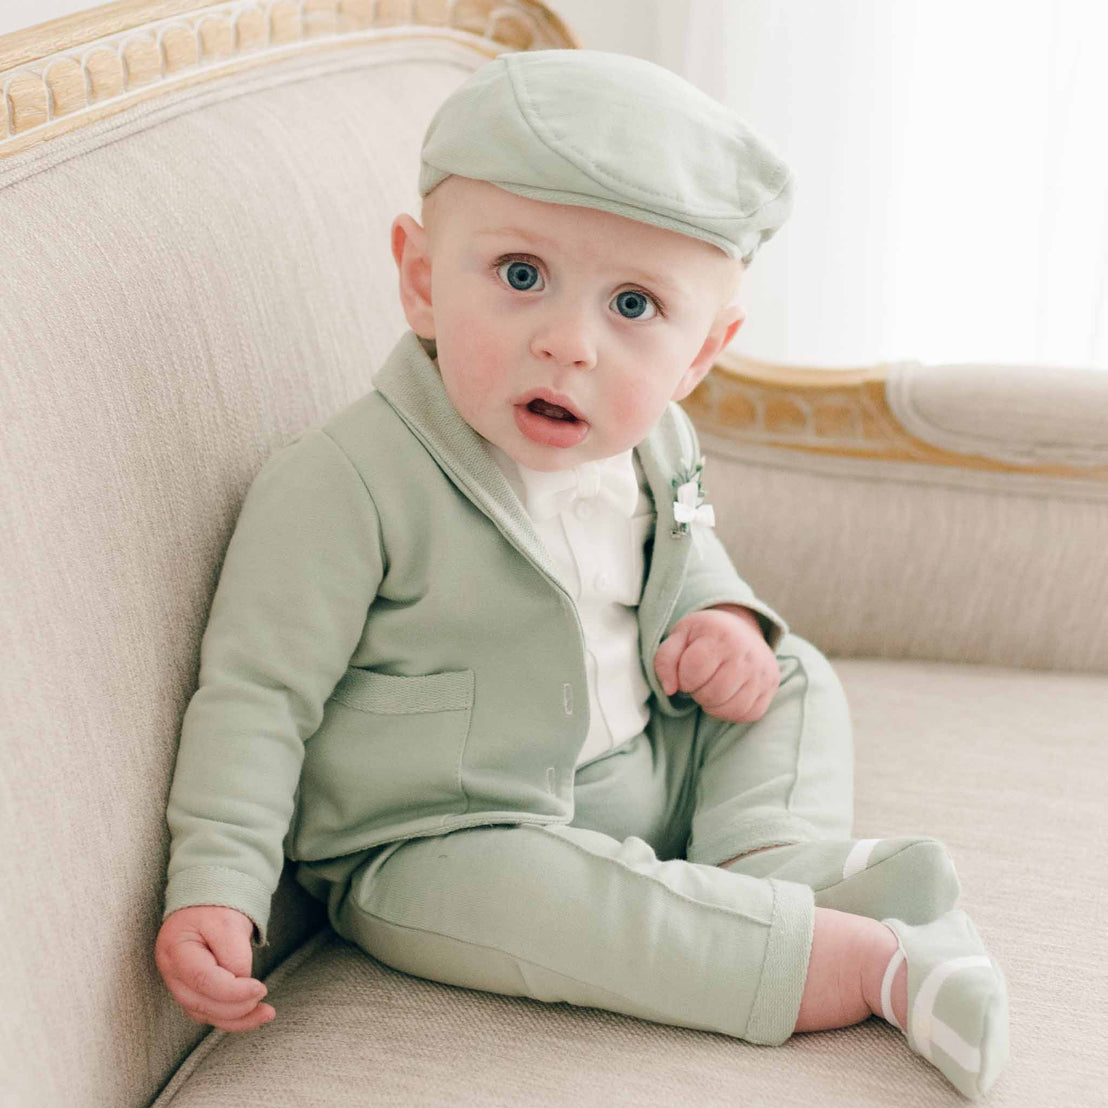 Baby boy sitting in sage green suit, newsboy cap and booties